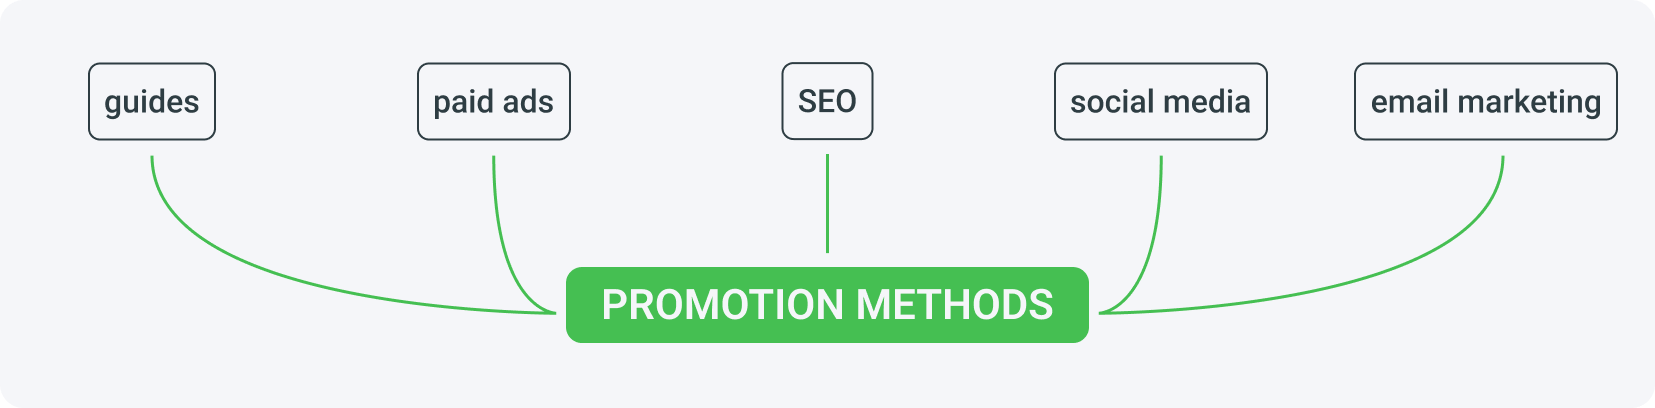 Recommended promotion methods in Tier 1 countries